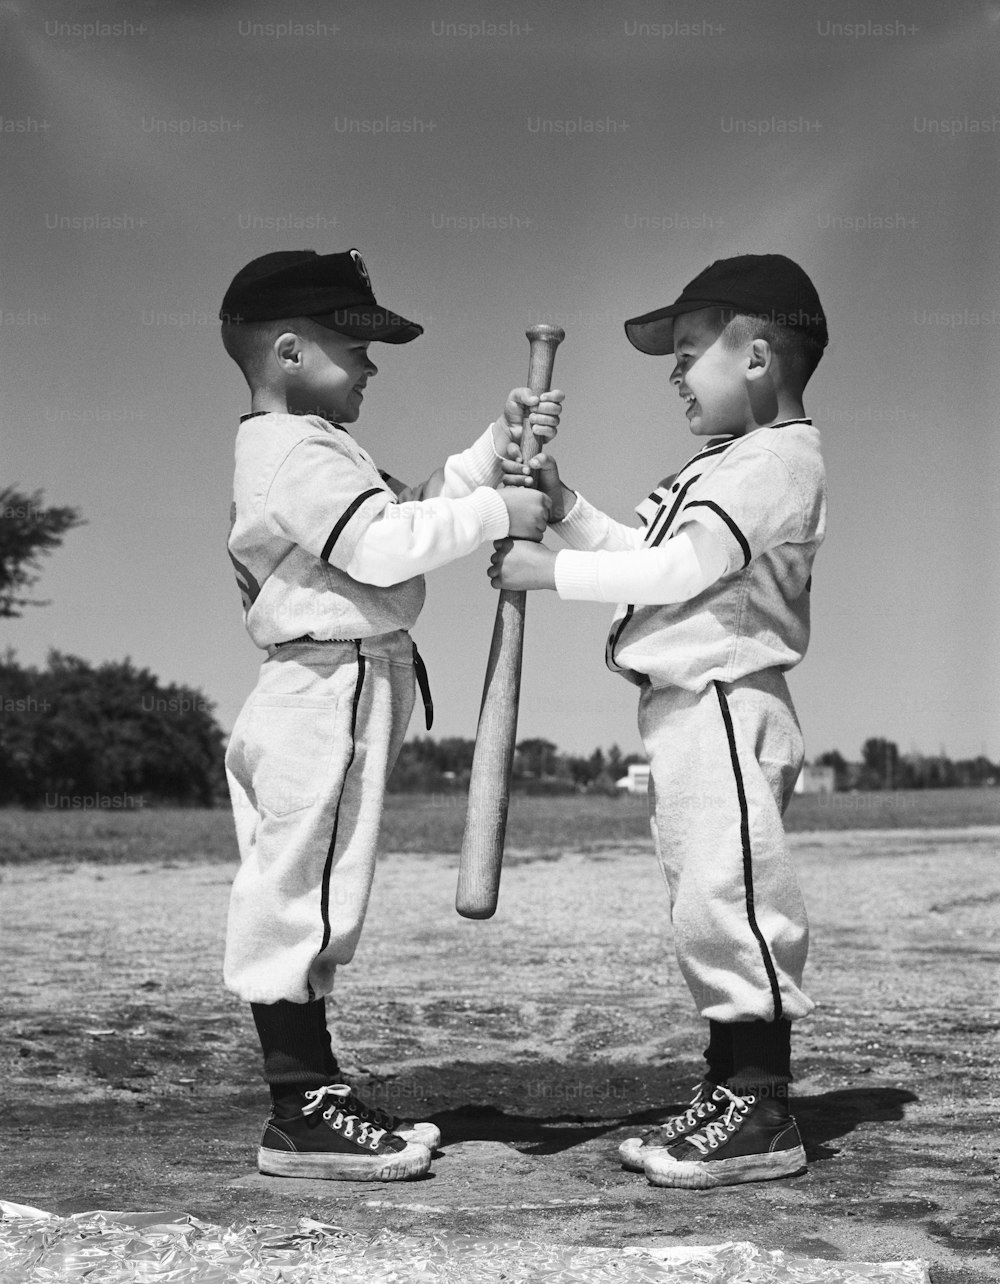 Little League Baseball Portrait Stock Photo, Picture and Royalty Free  Image. Image 18520585.